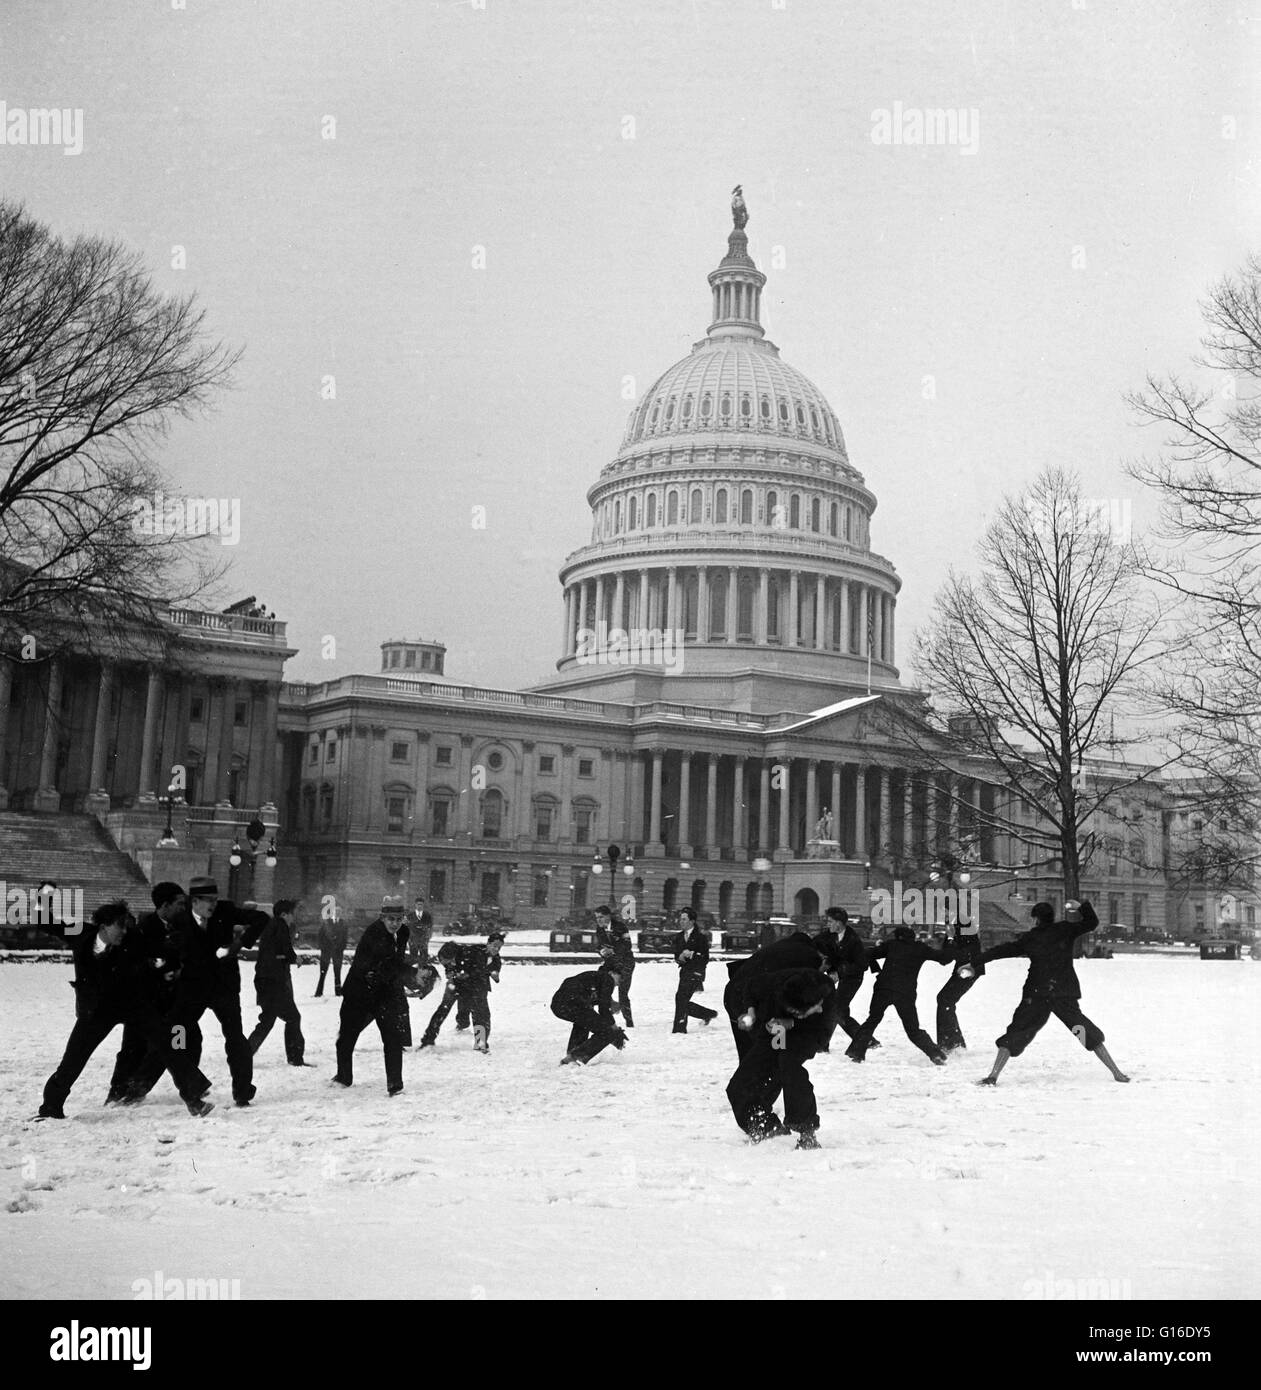 Entitled: 'Snowball fight in front of U.S. Capitol, Washington, D.C.' A United States Senate Page is a non-partisan federal employee serving the United States Senate in Washington, DC. Despite the non-partisan affiliation, pages are typically divided to s Stock Photo